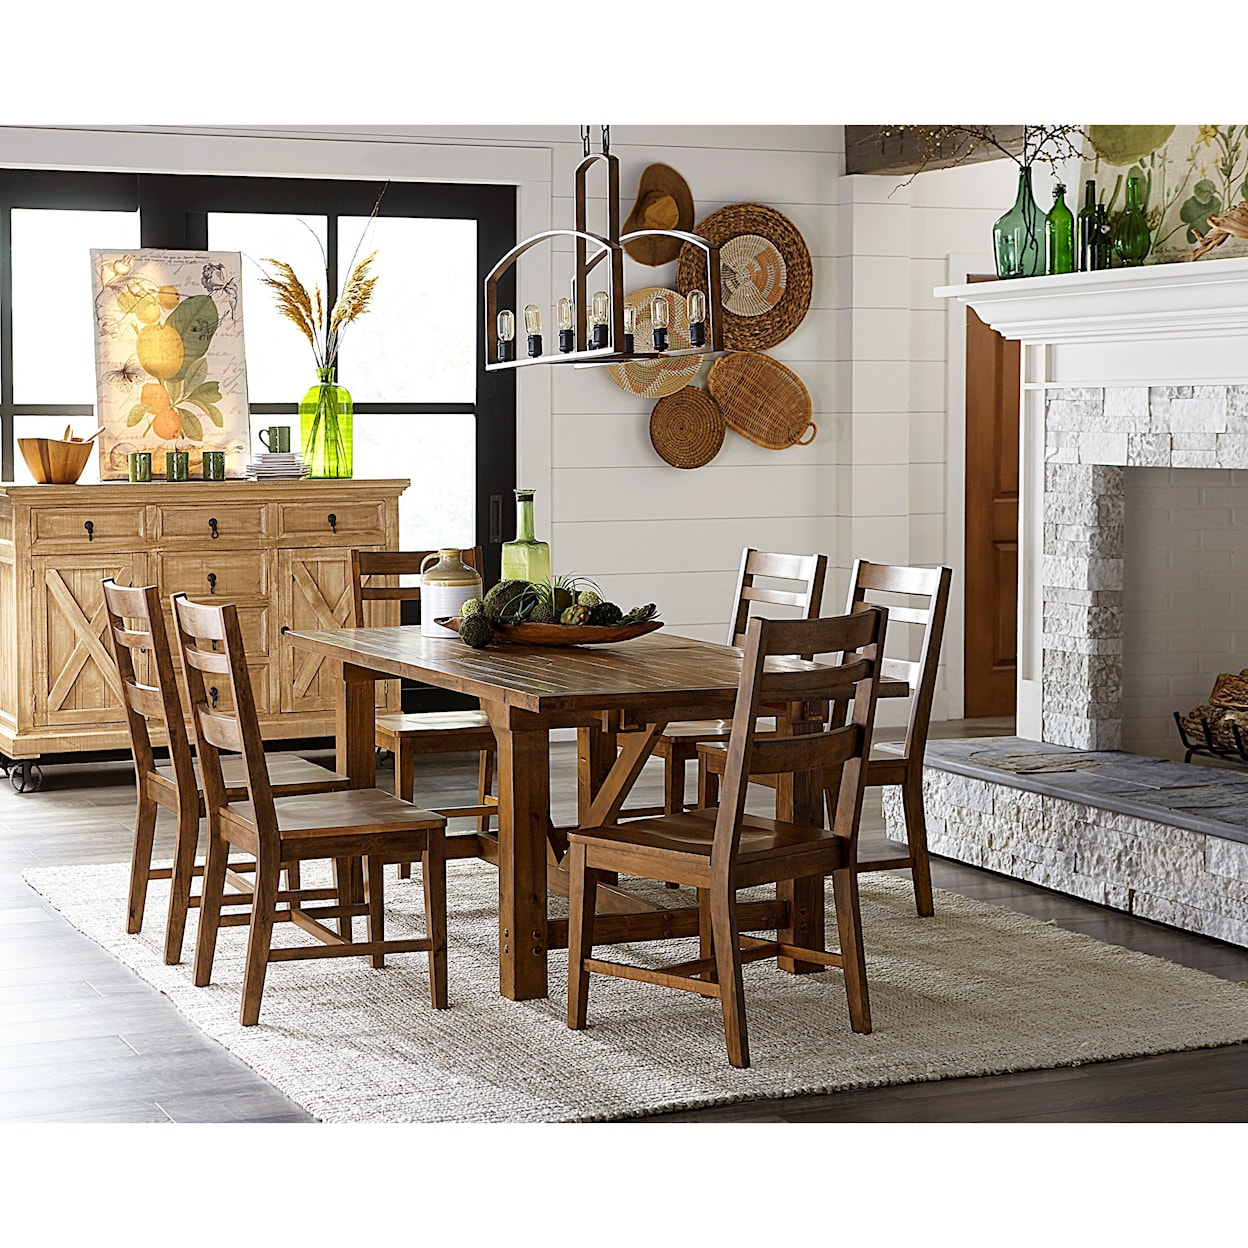 Carolina Chairs Wilder 7-Piece Table and Chair Set